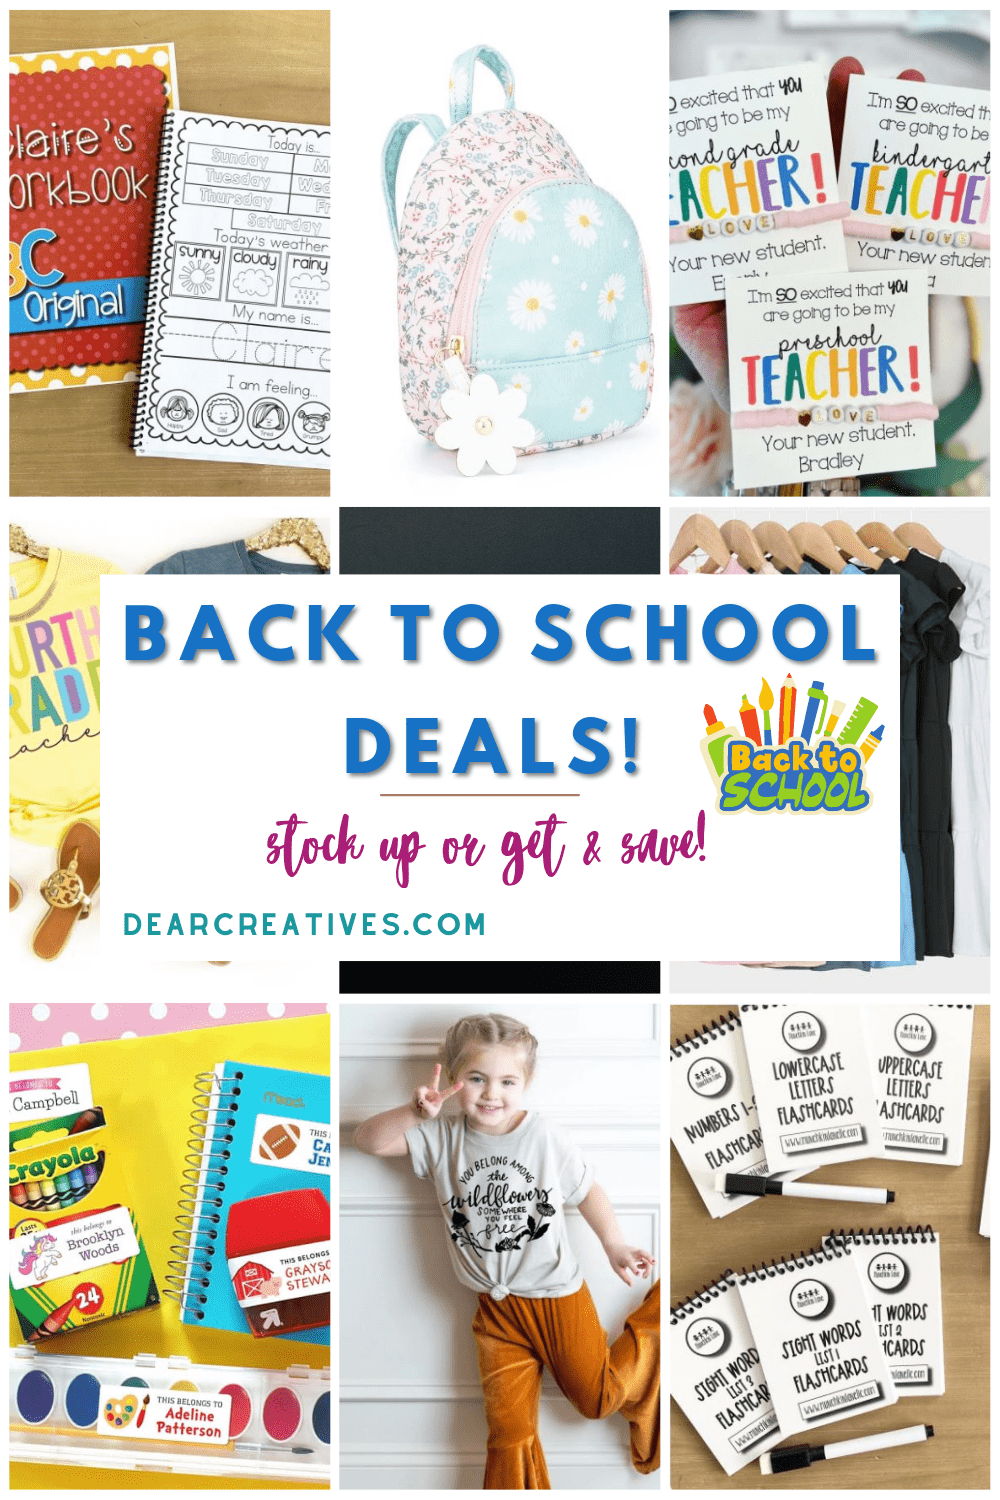 Back To School Deals - These savings and deals are worth checking out. From clothes to back to school essentials... Find out more at DearCreatives. com